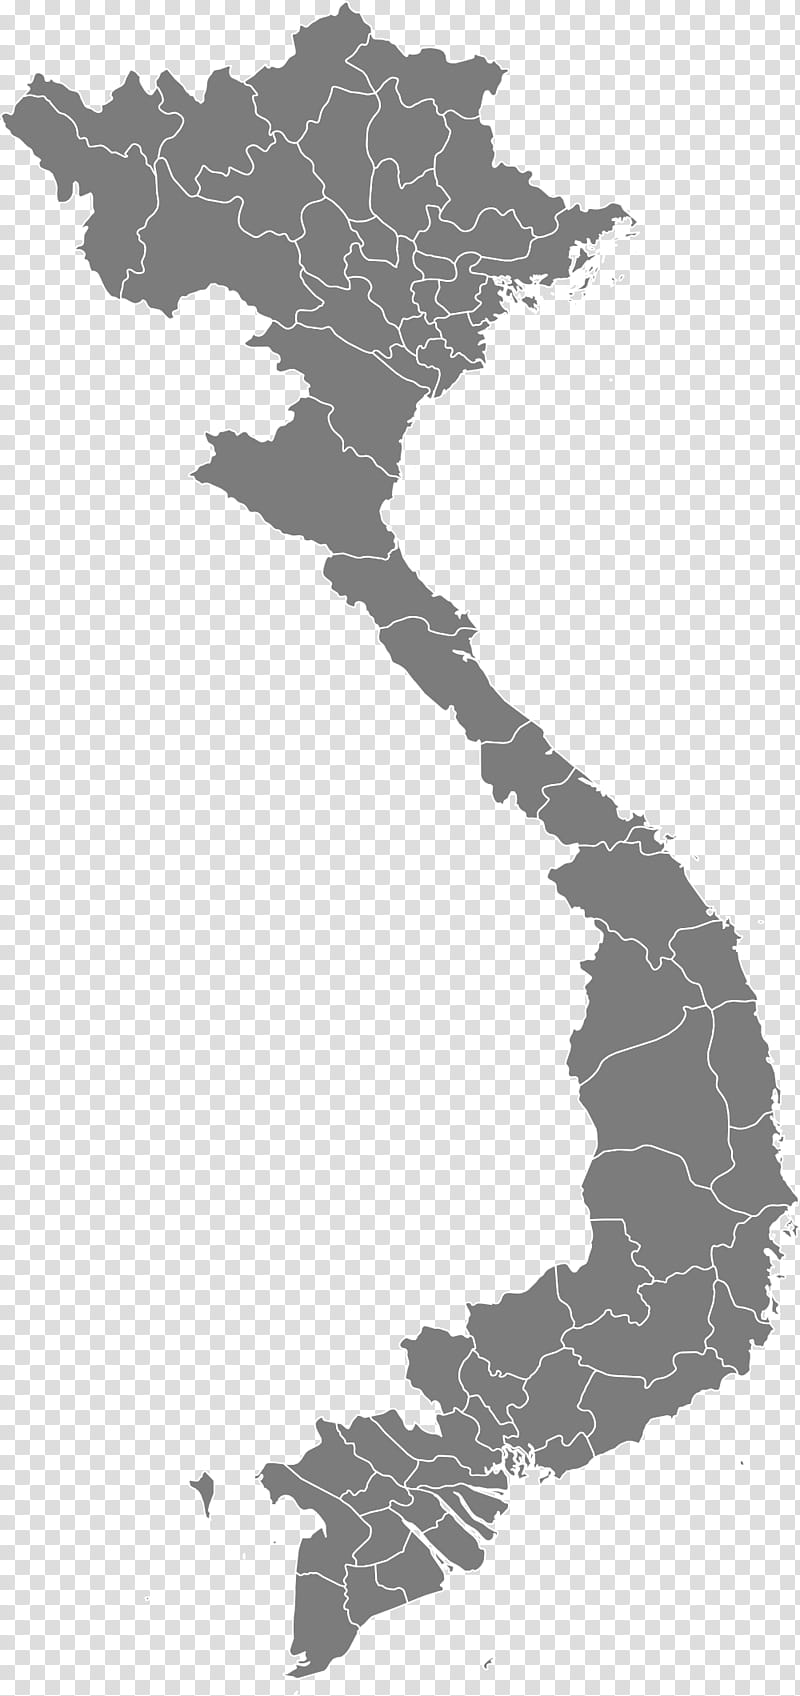 Flag, Vietnam, Map, Flag Of Vietnam, Black And White
, Tree transparent background PNG clipart